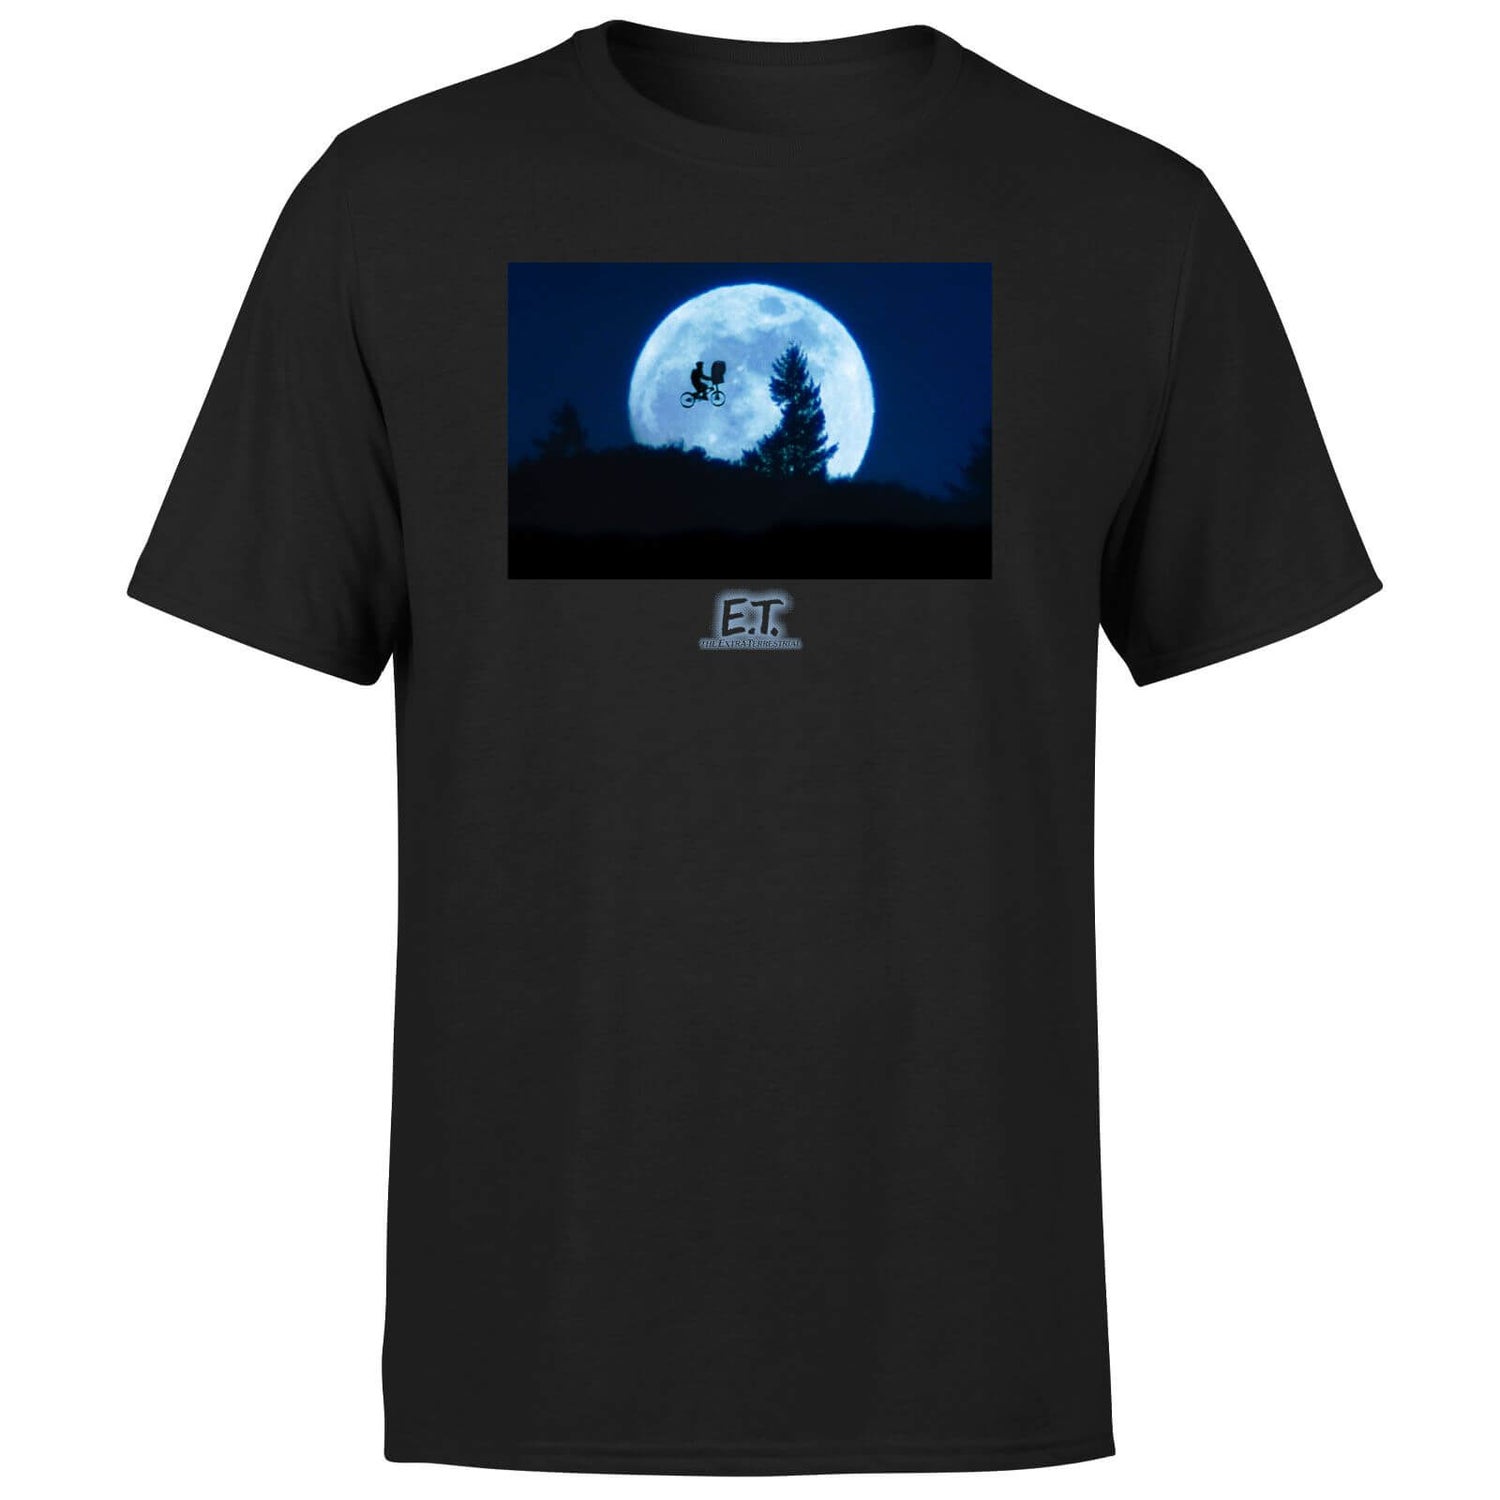 E.T. the Extra-Terrestrial Moon Cycle Unisex T-Shirt - Black